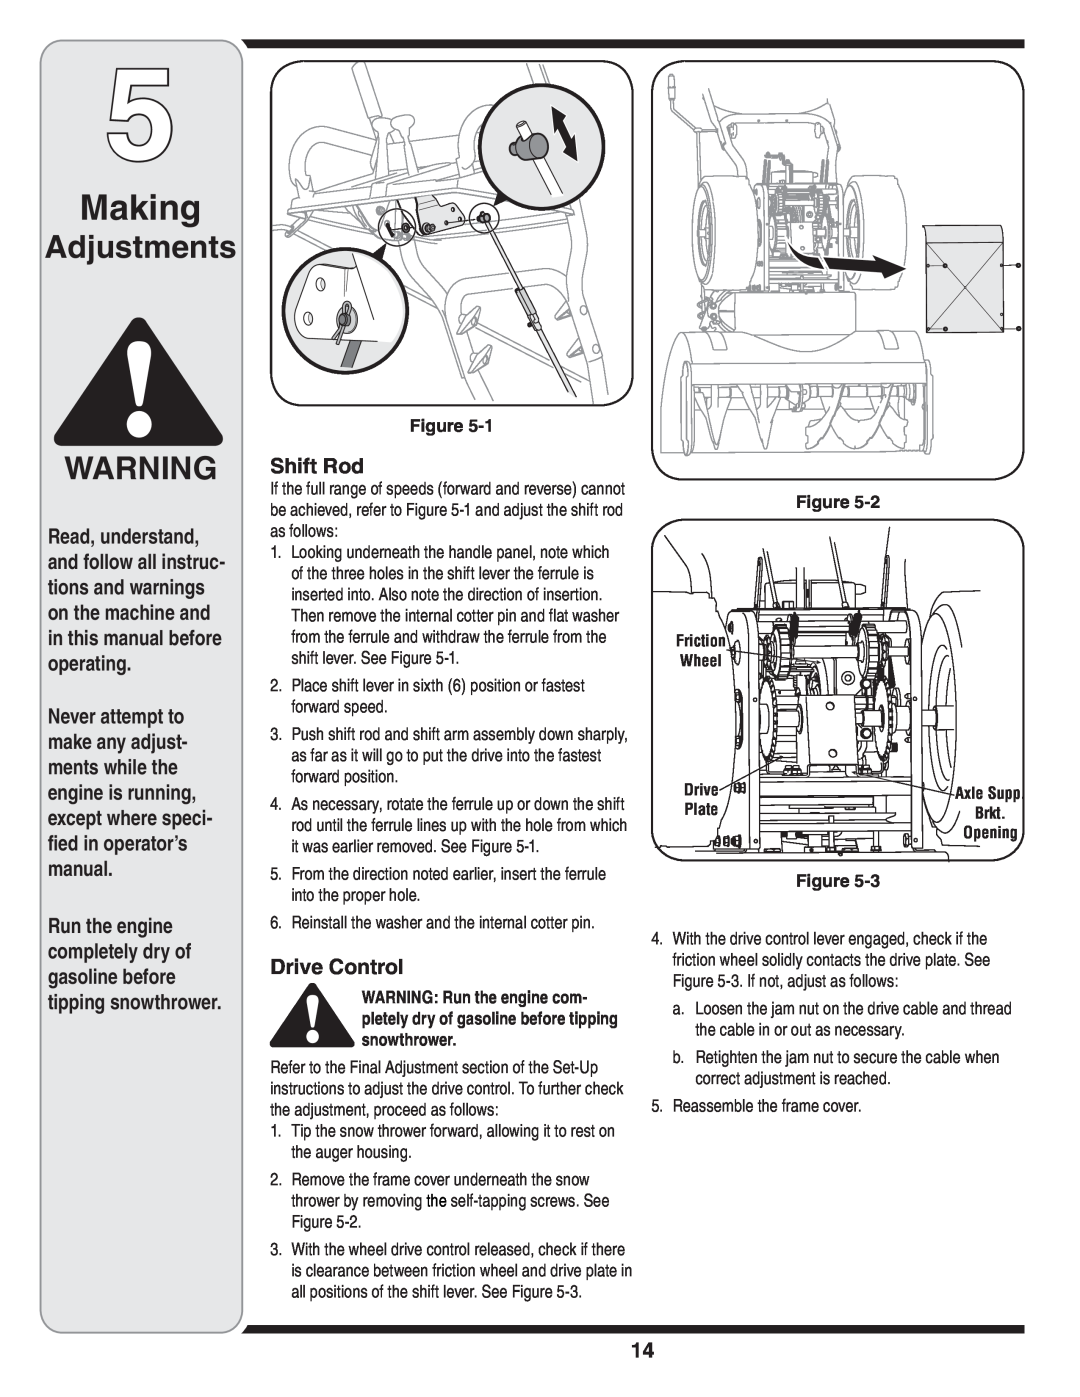 MTD 769-04101 warranty Making, Adjustments, Run the engine completely dry of gasoline before tipping snowthrower 